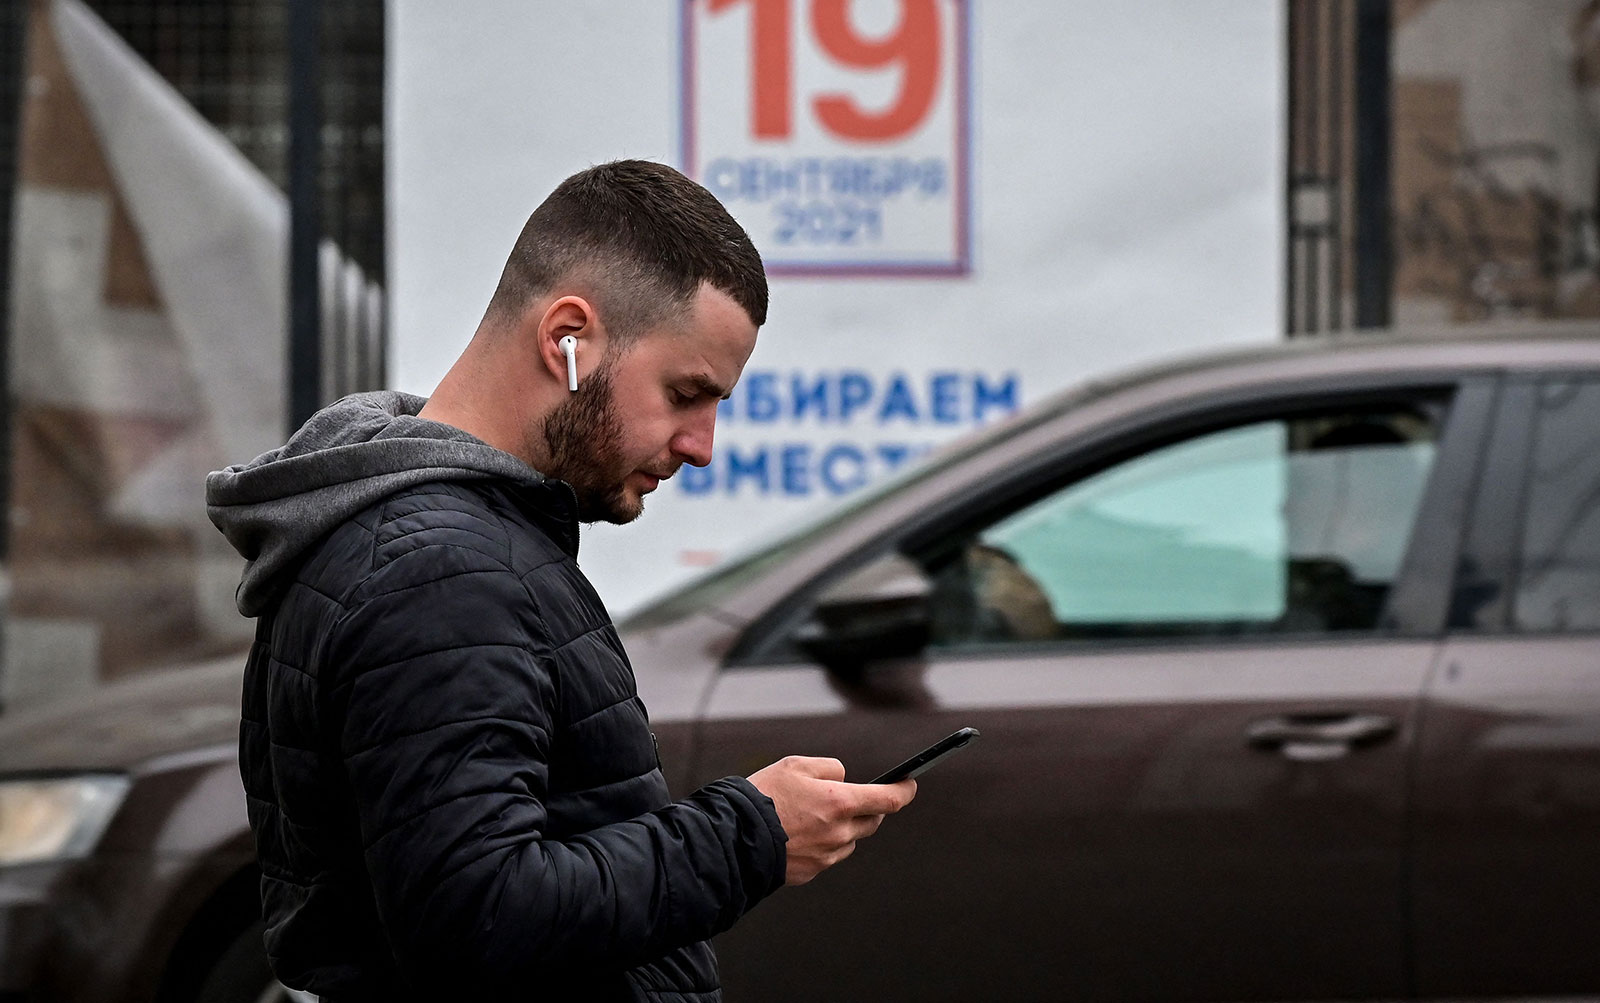 A man checks his phone while walking down a street in Moscow in 2021.